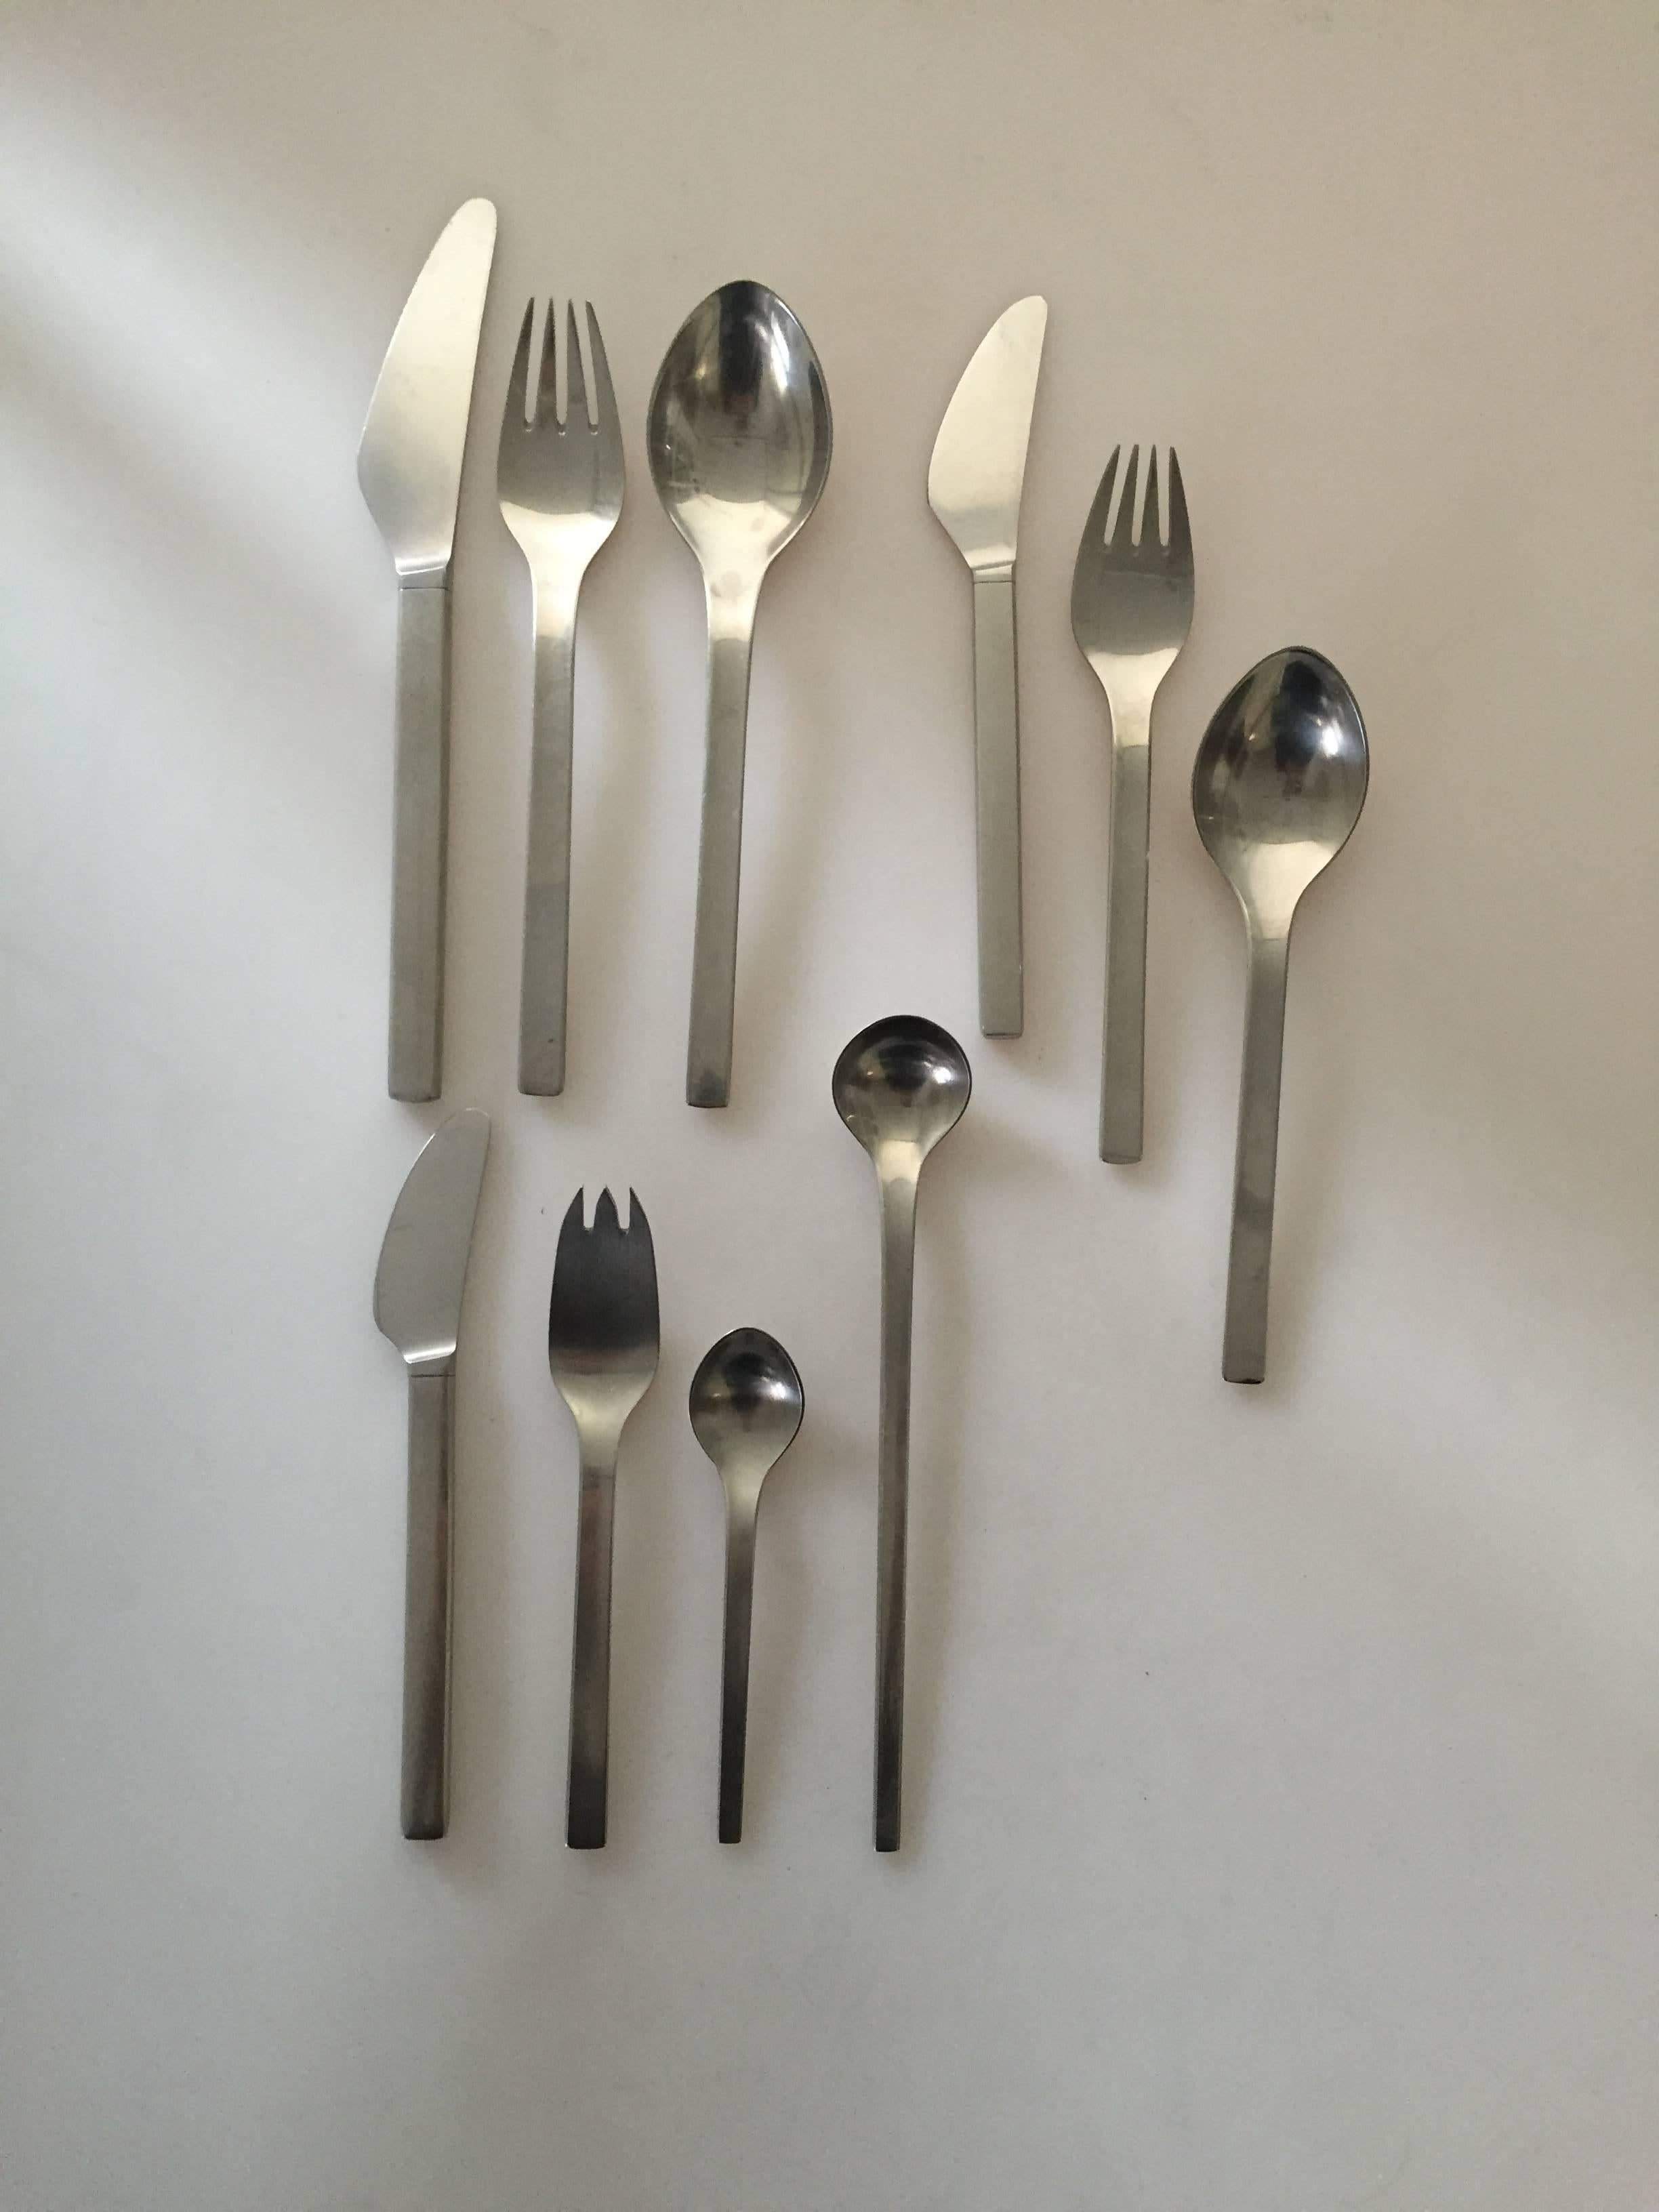 Georg Jensen stainless steel Tuja/Tanaquil stainless steel set of 72 pieces.

 The set consists of:

Eight dinner knifes 22.3 cm.
Eight dinner forks 19 cm.
Eight dinner spoons 19.5 cm.
Eight lunch knifes 18.6 cm.
Eight lunch forks 17.3